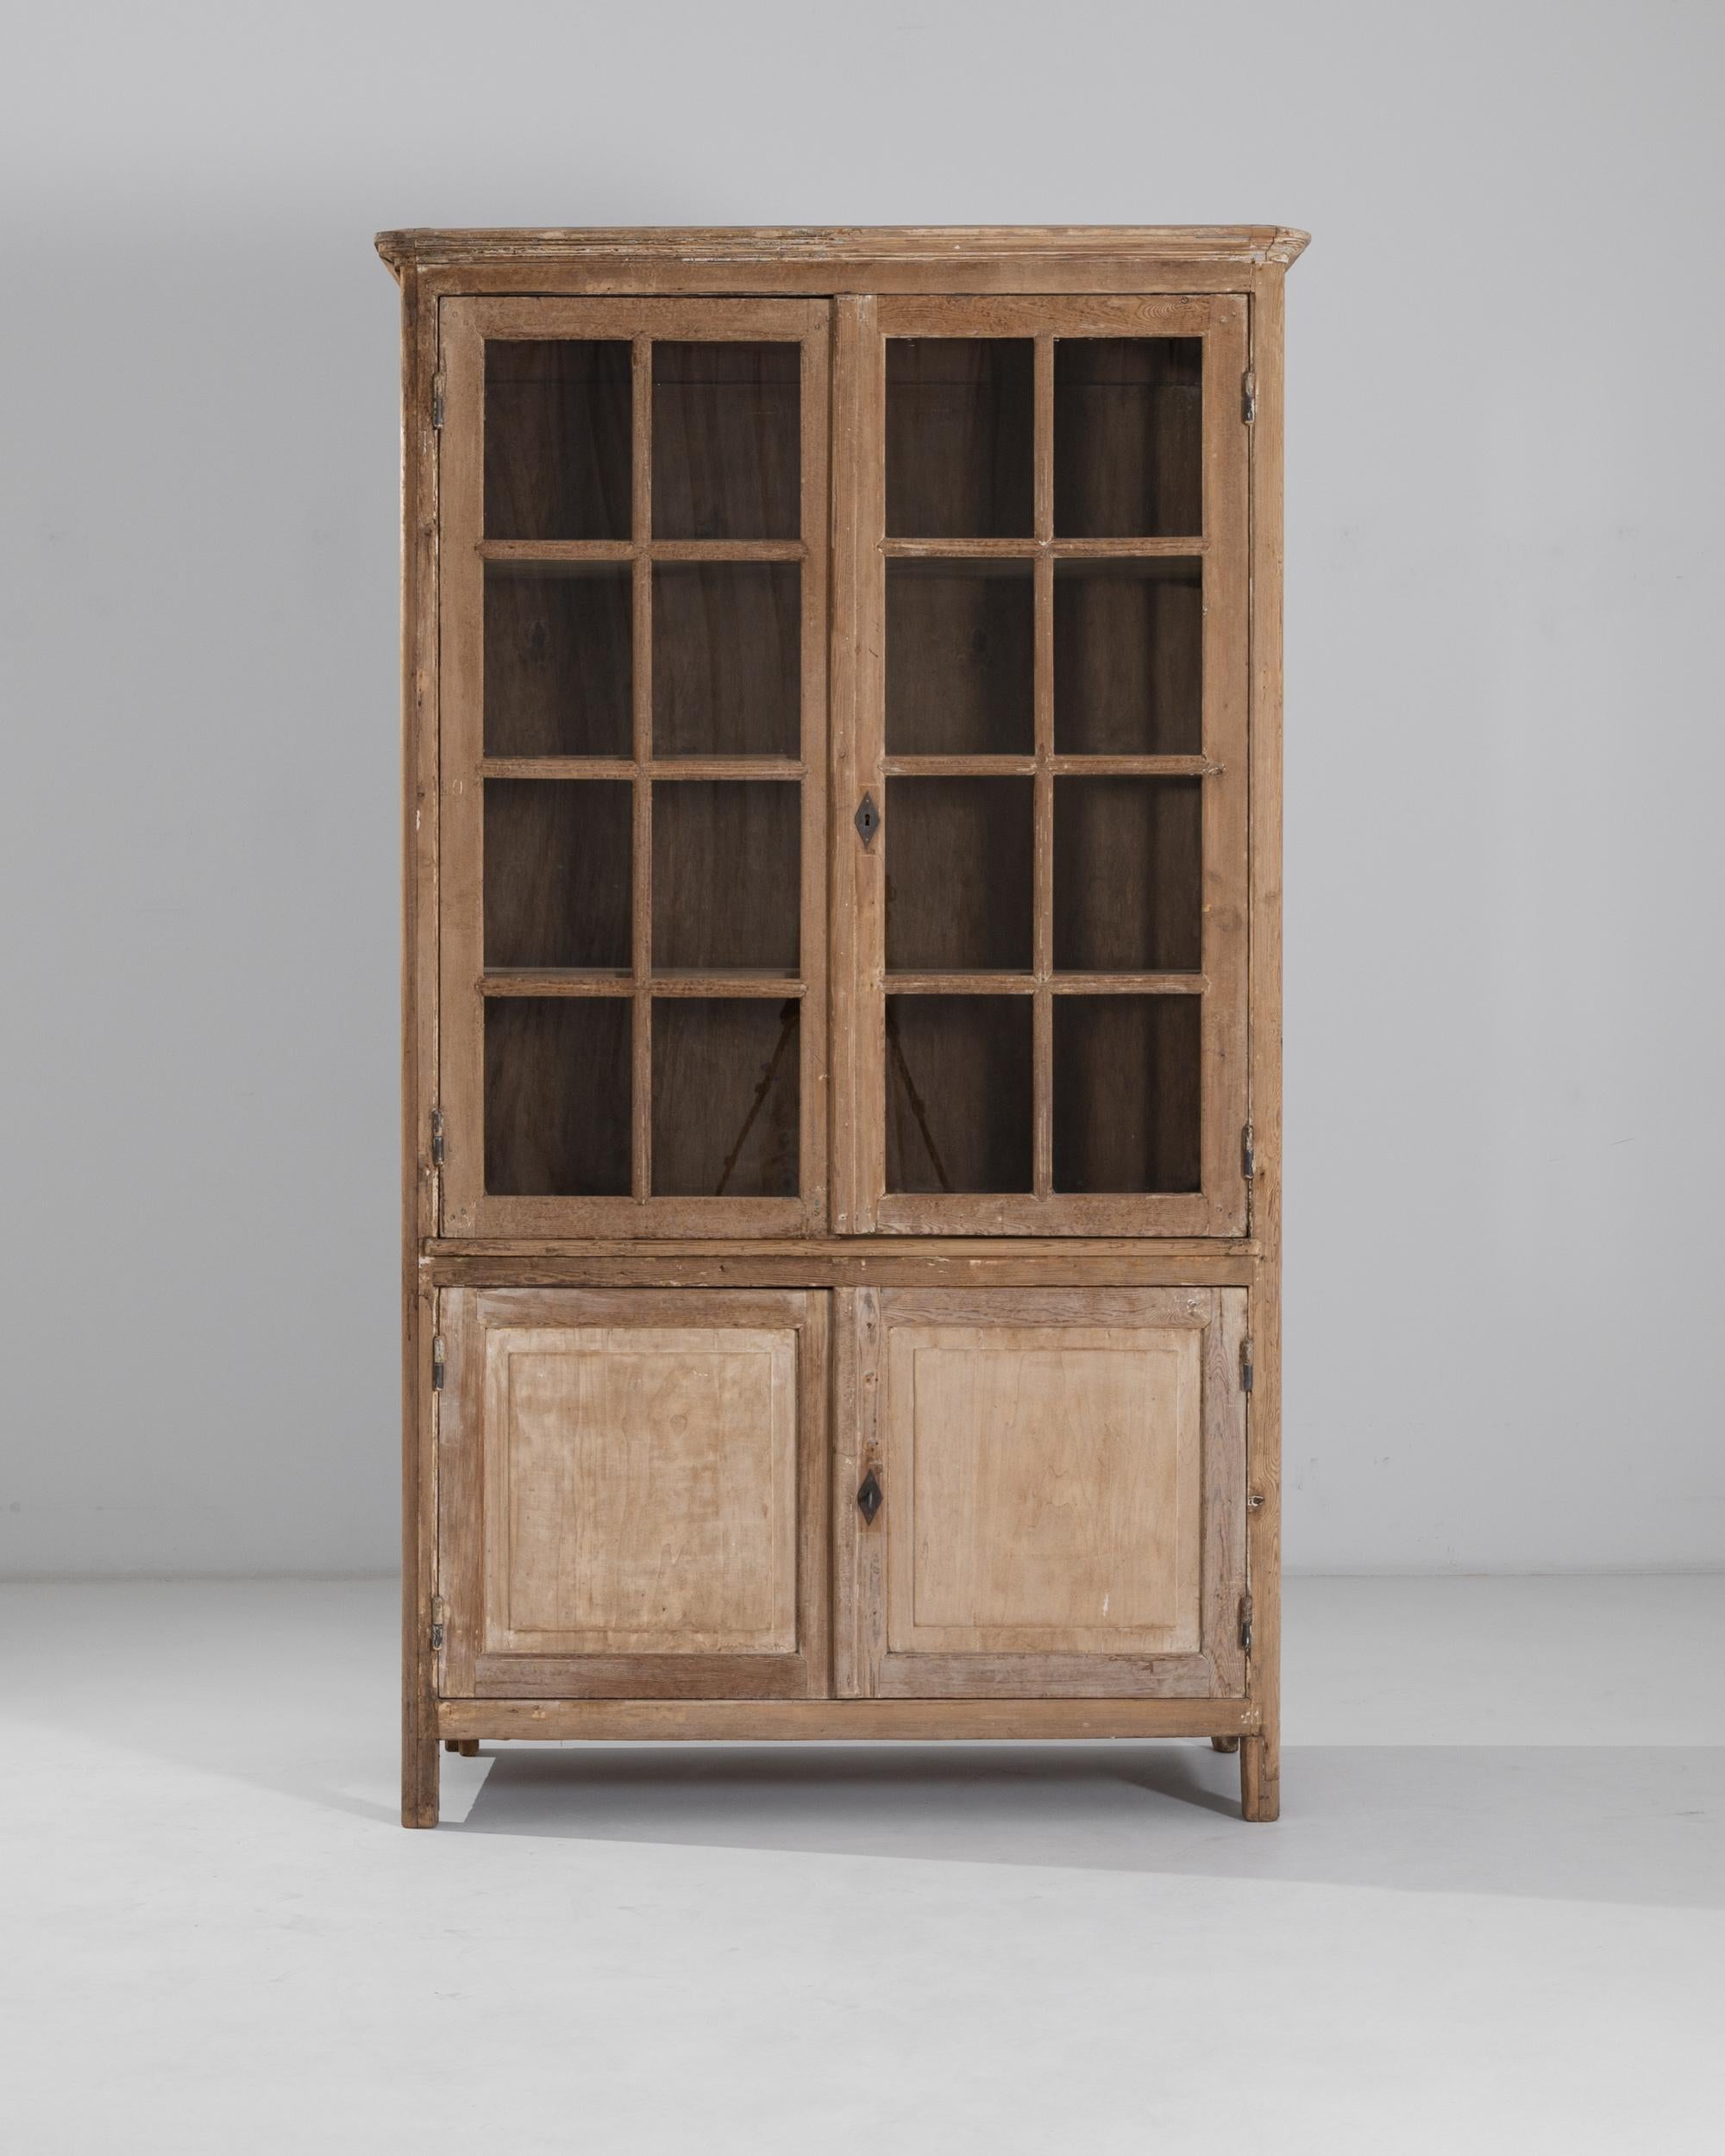 The graceful simplicity of this antique provincial vitrine gives it an evergreen appeal. Made in France in the 1800s, mullioned windows on four sides flood the upper cabinet with natural light, making it the perfect display case for treasured